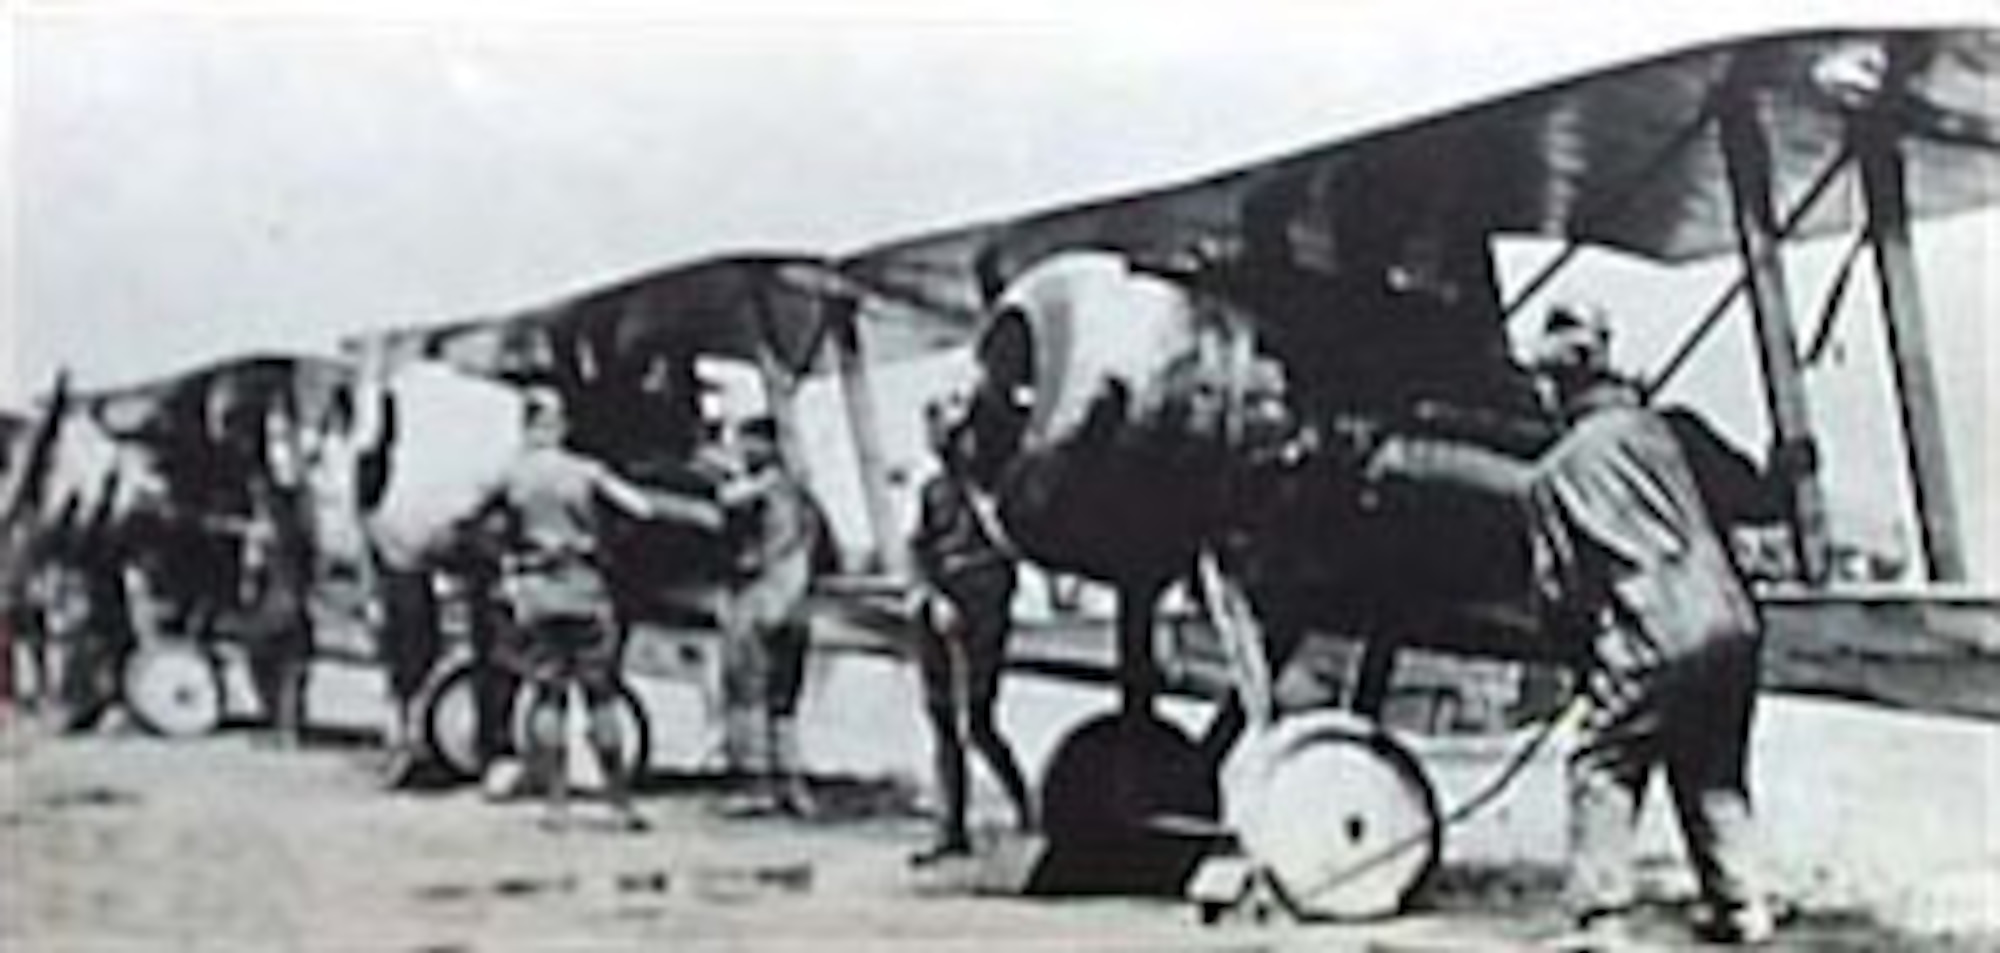 Nieuport 28s of the 95th Aero Squadron prepare to depart on a mission from Toul, France. (U.S. Air Force photo)